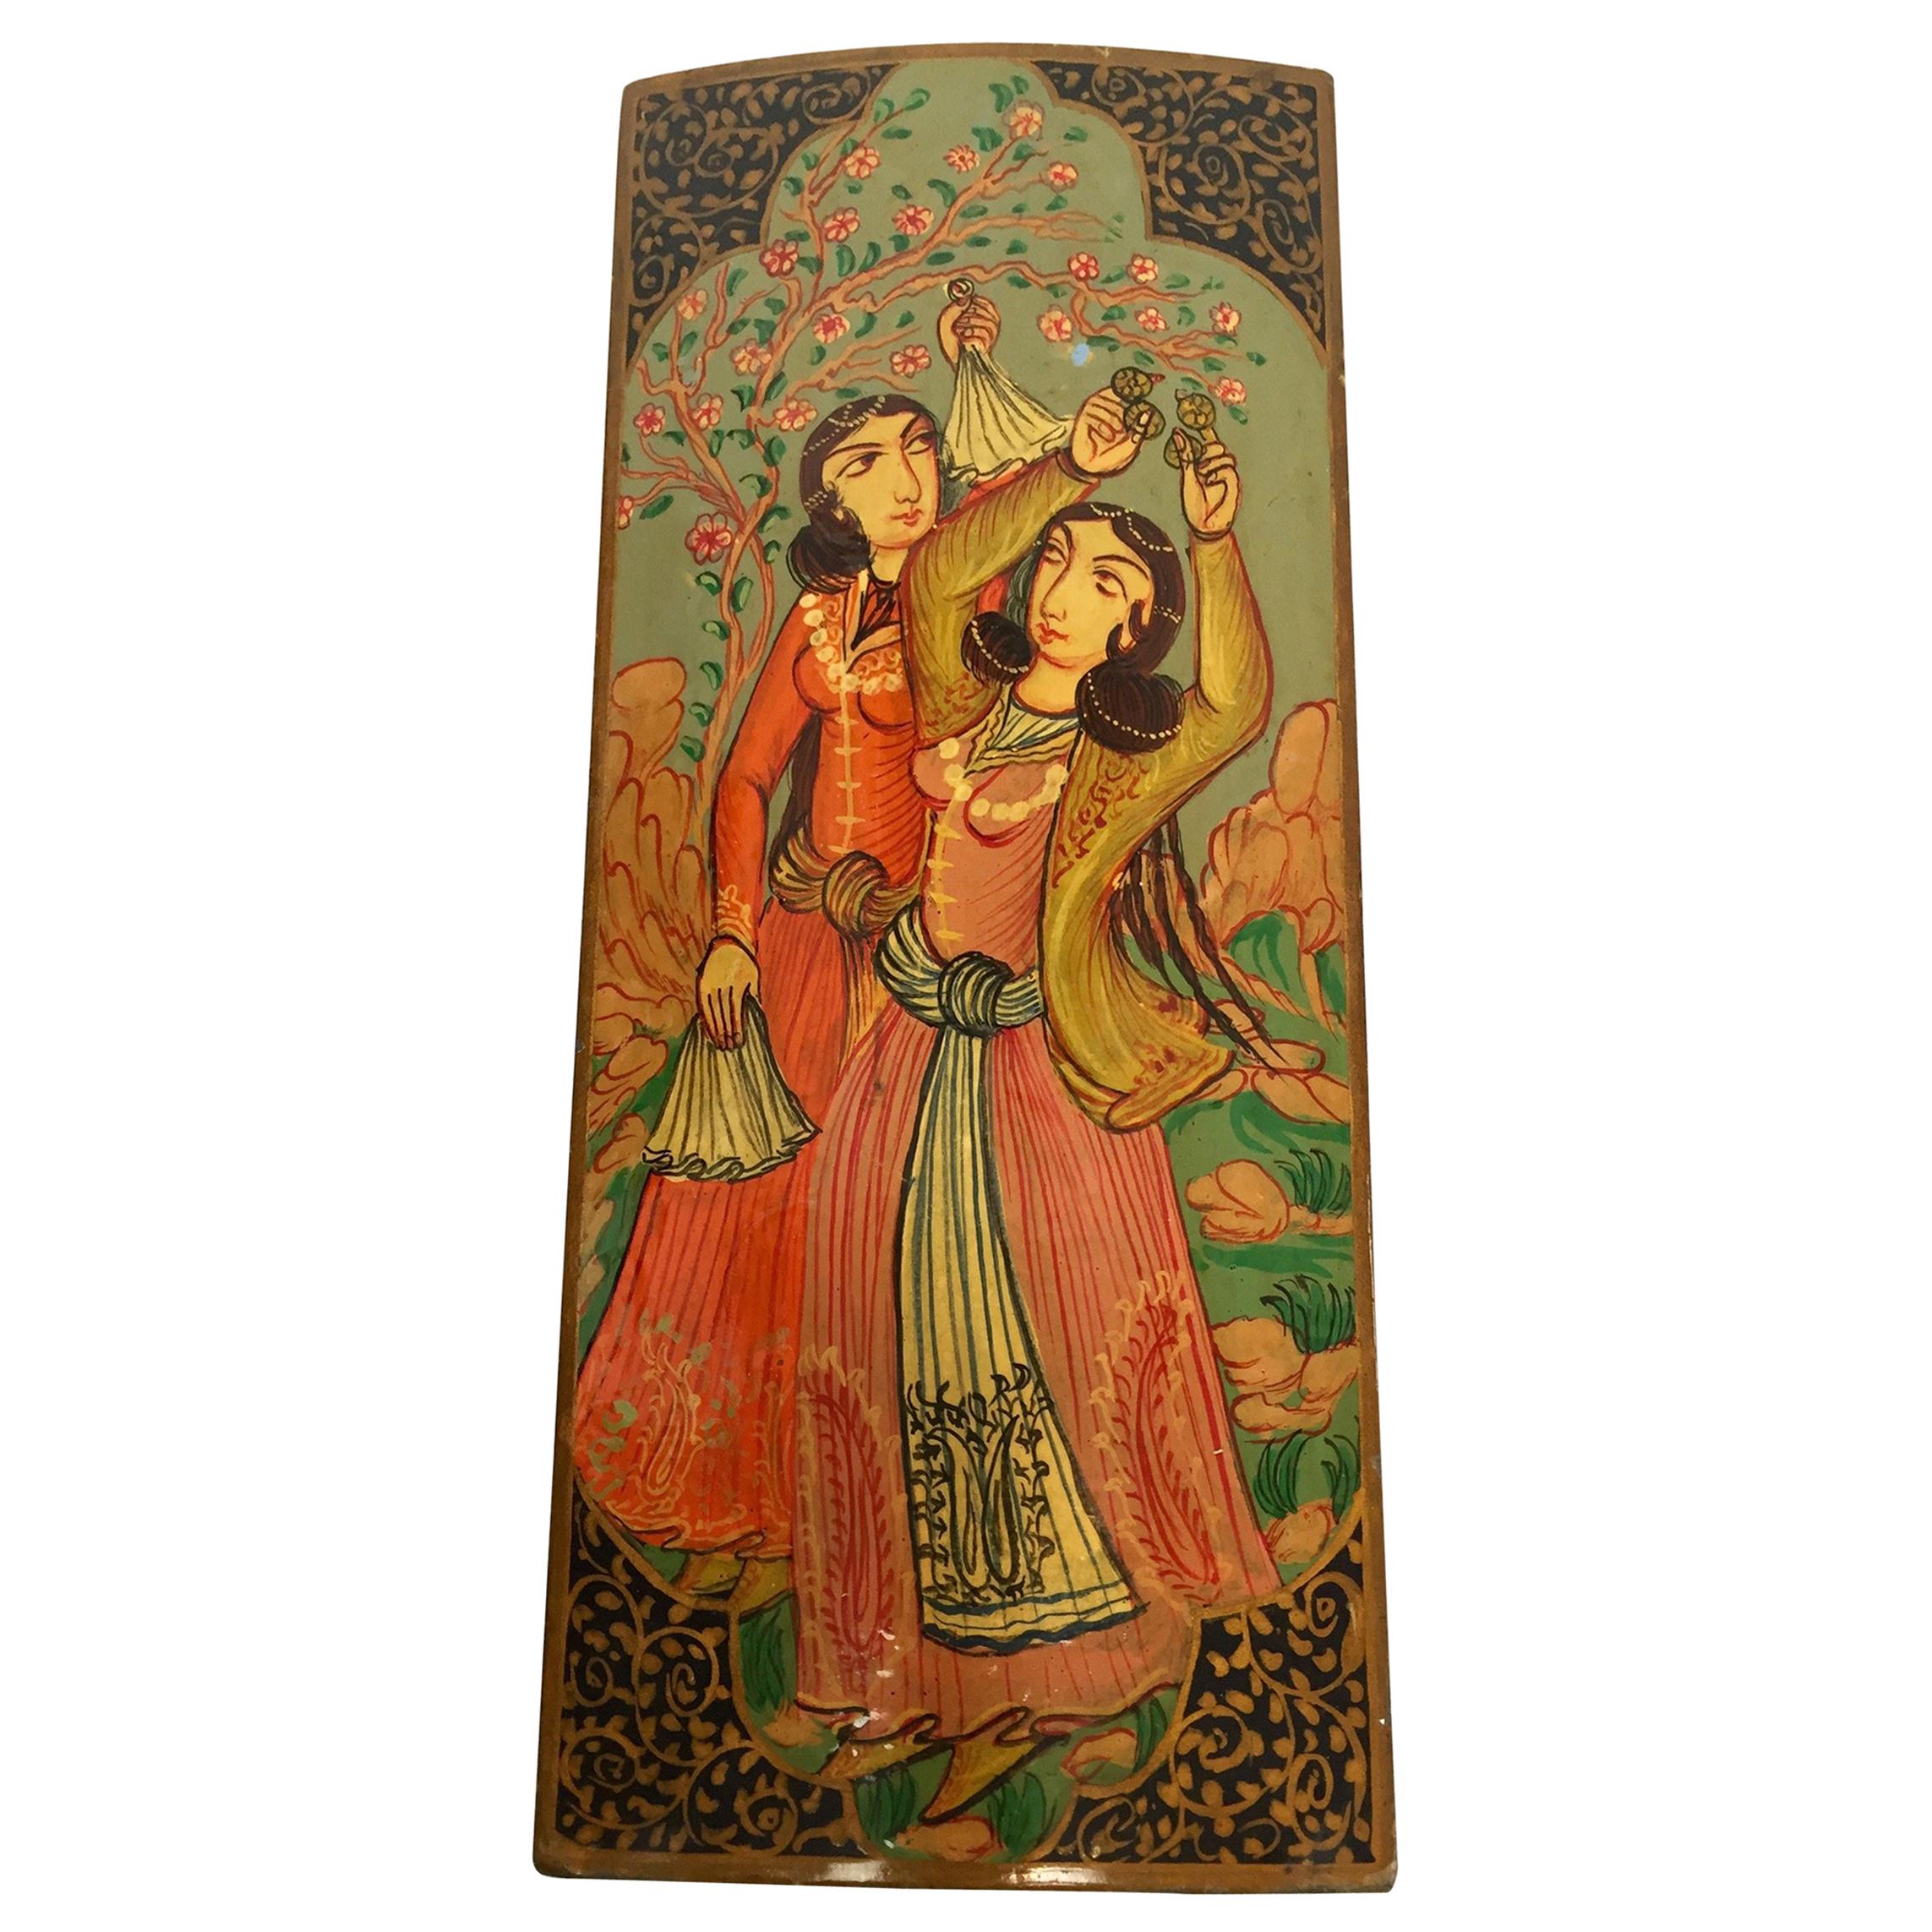 Lacquer Pen Box Hand Painted with Harem Girls Playing and Dancing